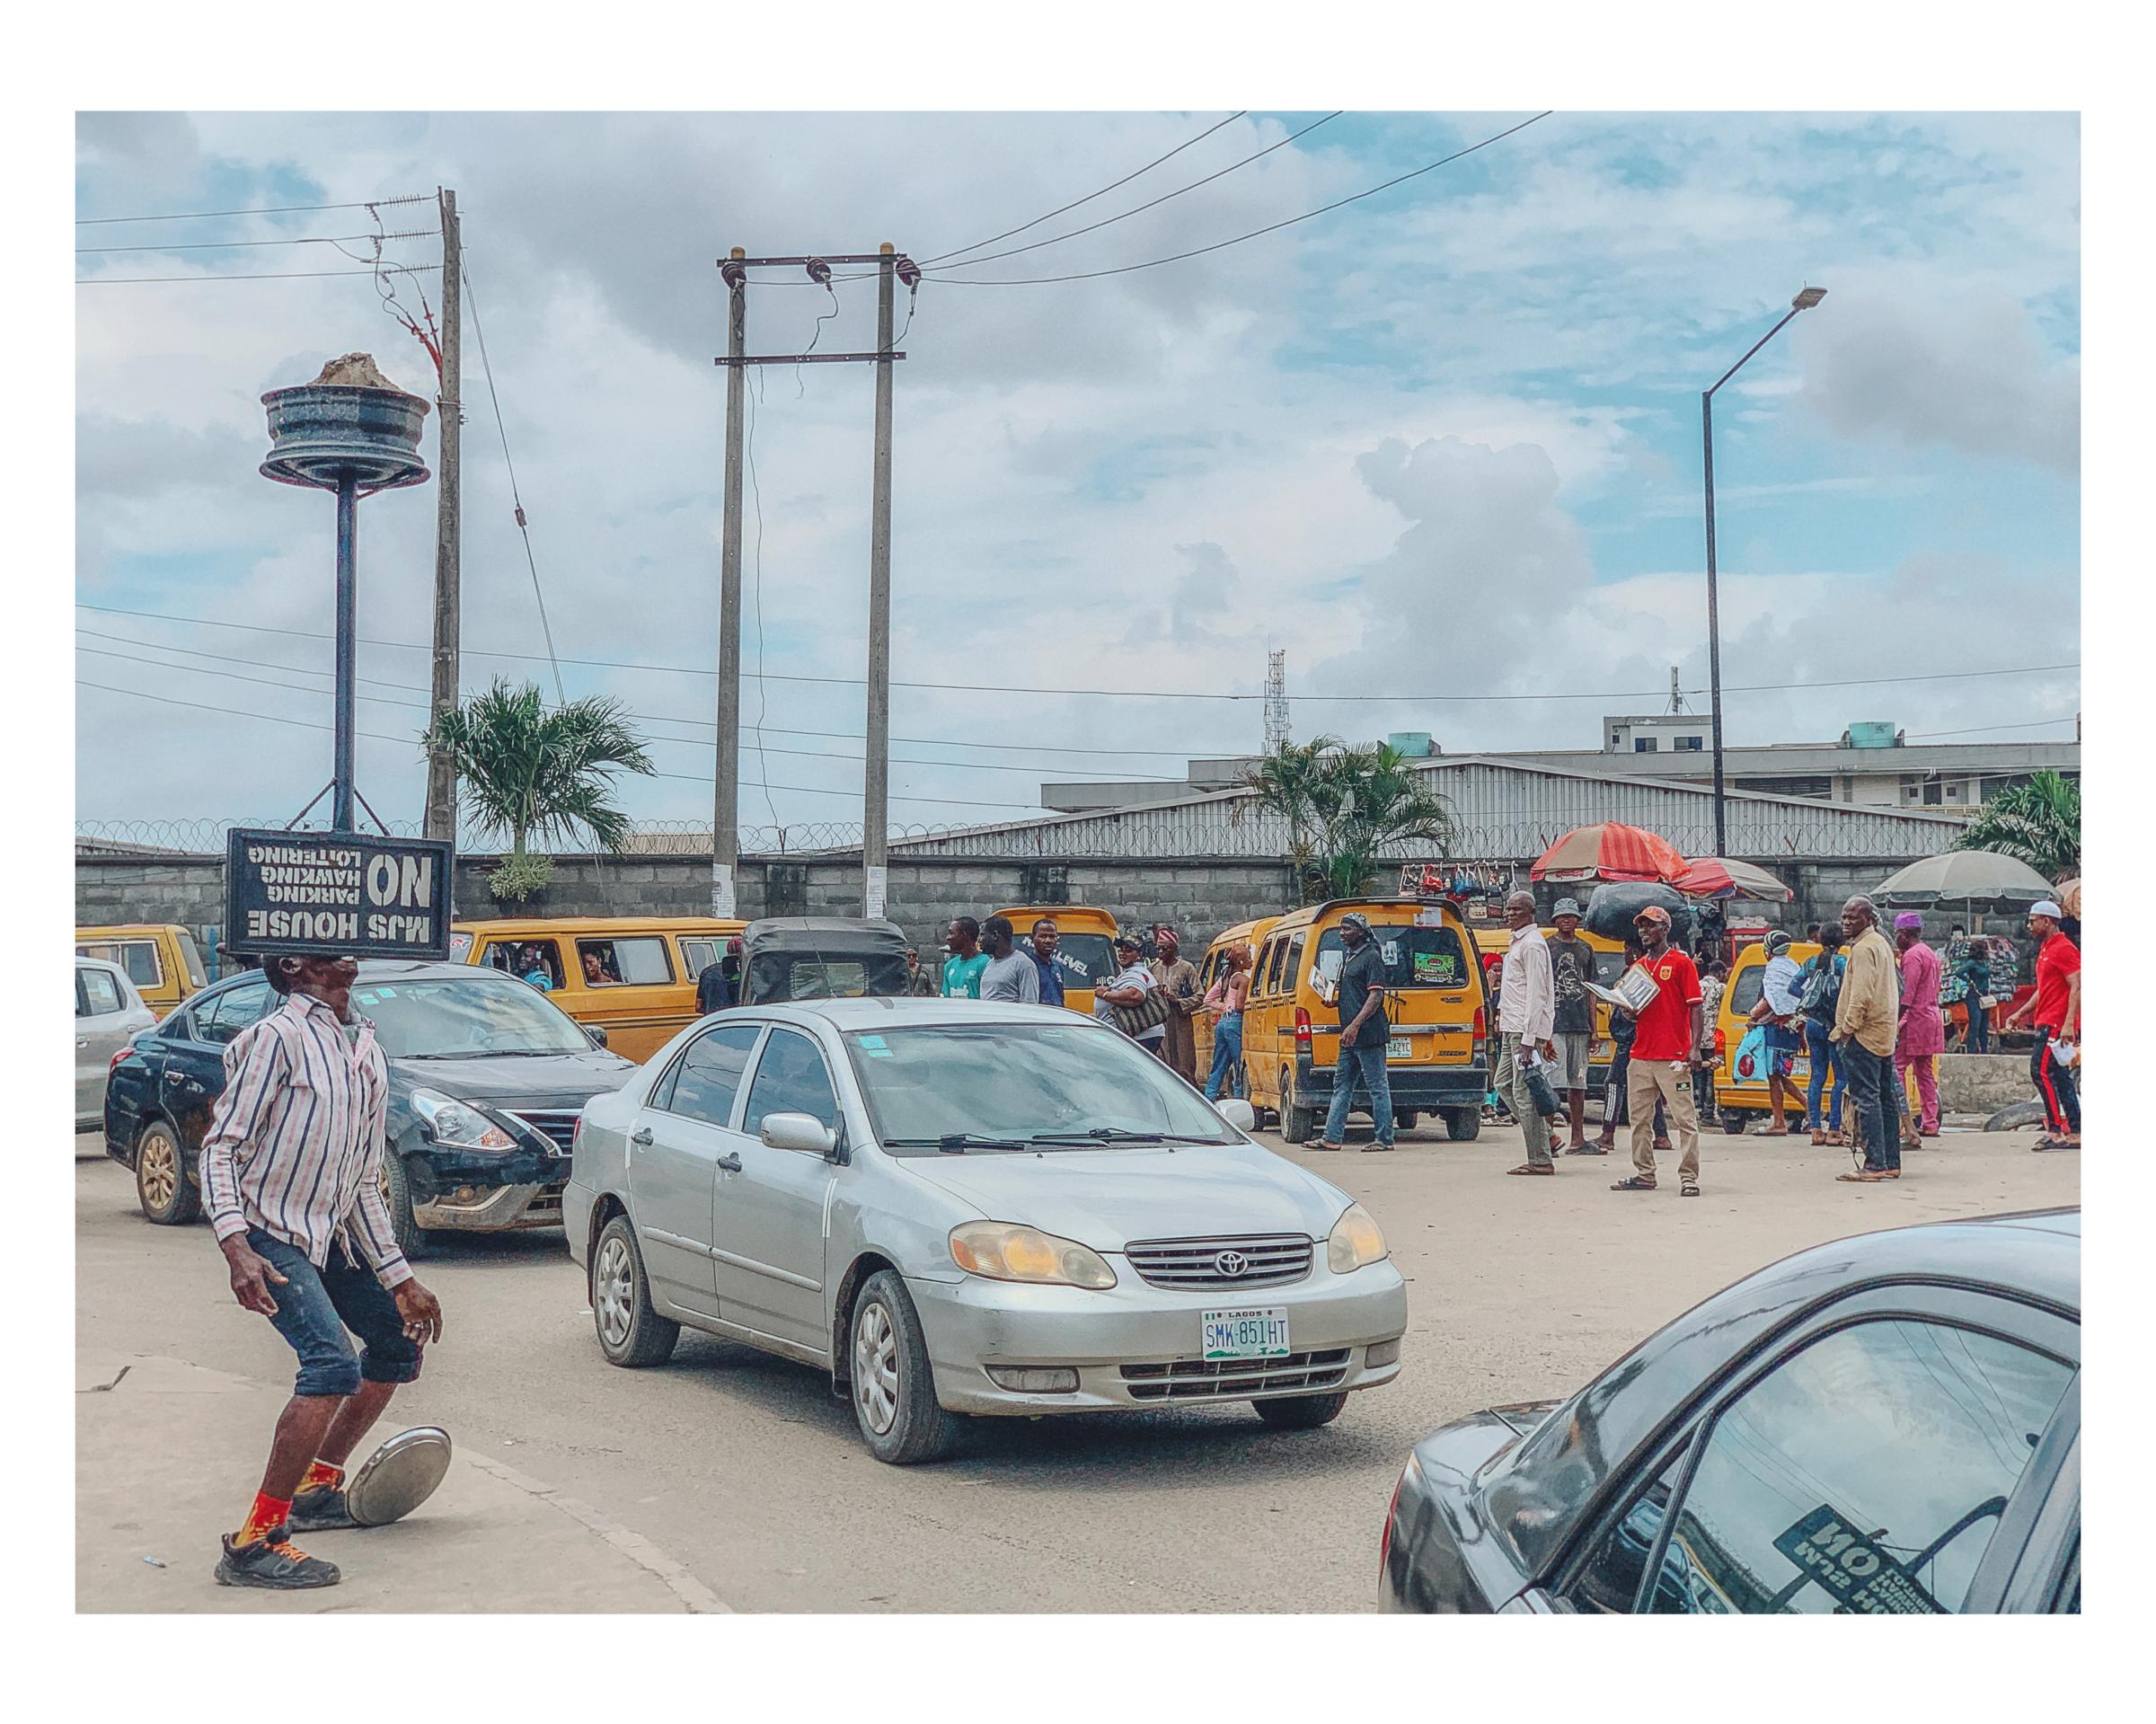 LagosLivesOn: A tribute to a resilient city